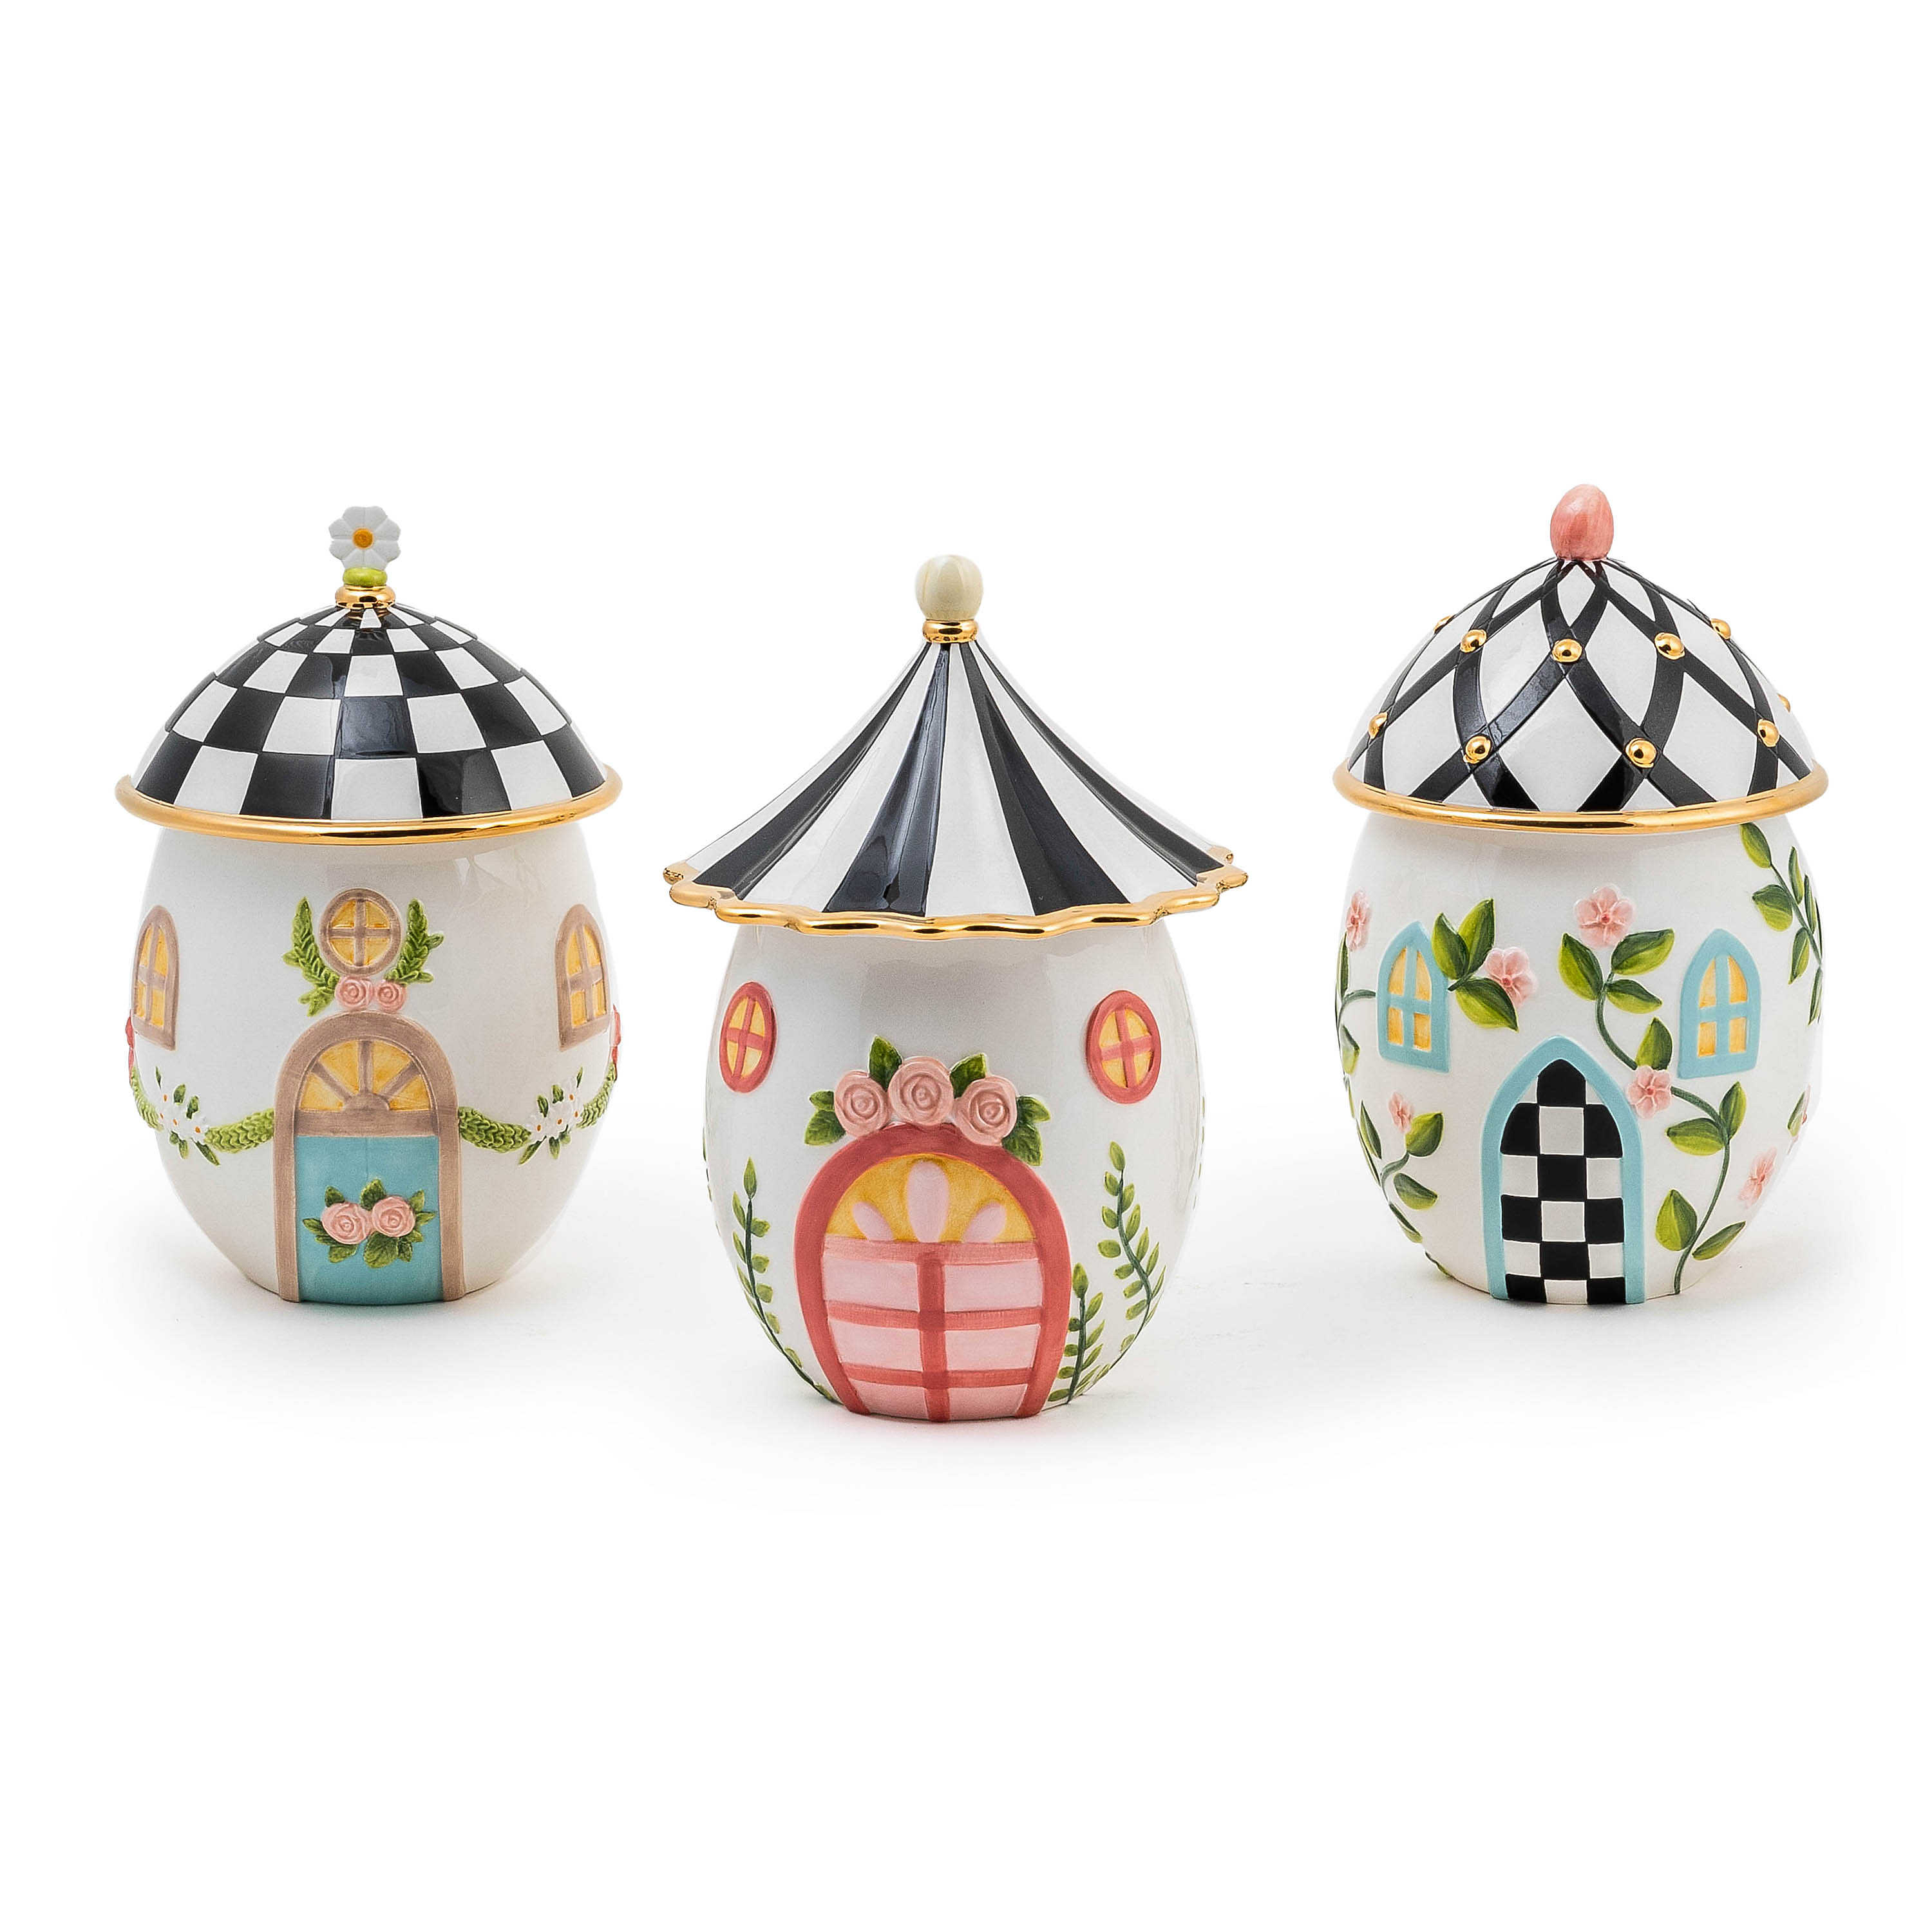 Spring Fling Canisters, Set of 3 mackenzie-childs Panama 0